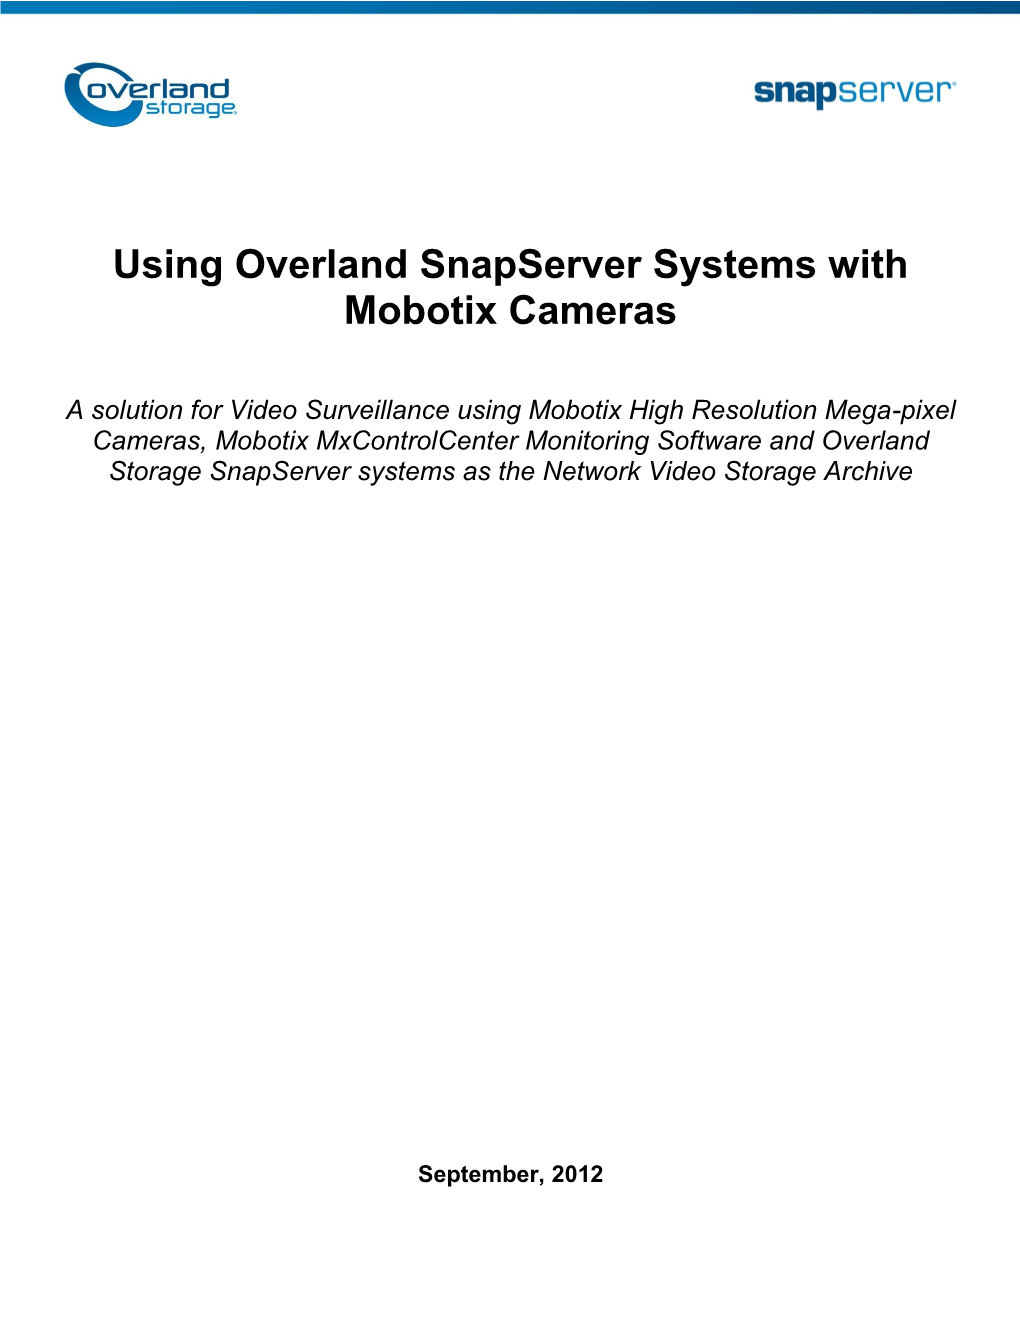 Using Overland Snapserver Systems with Mobotix Cameras